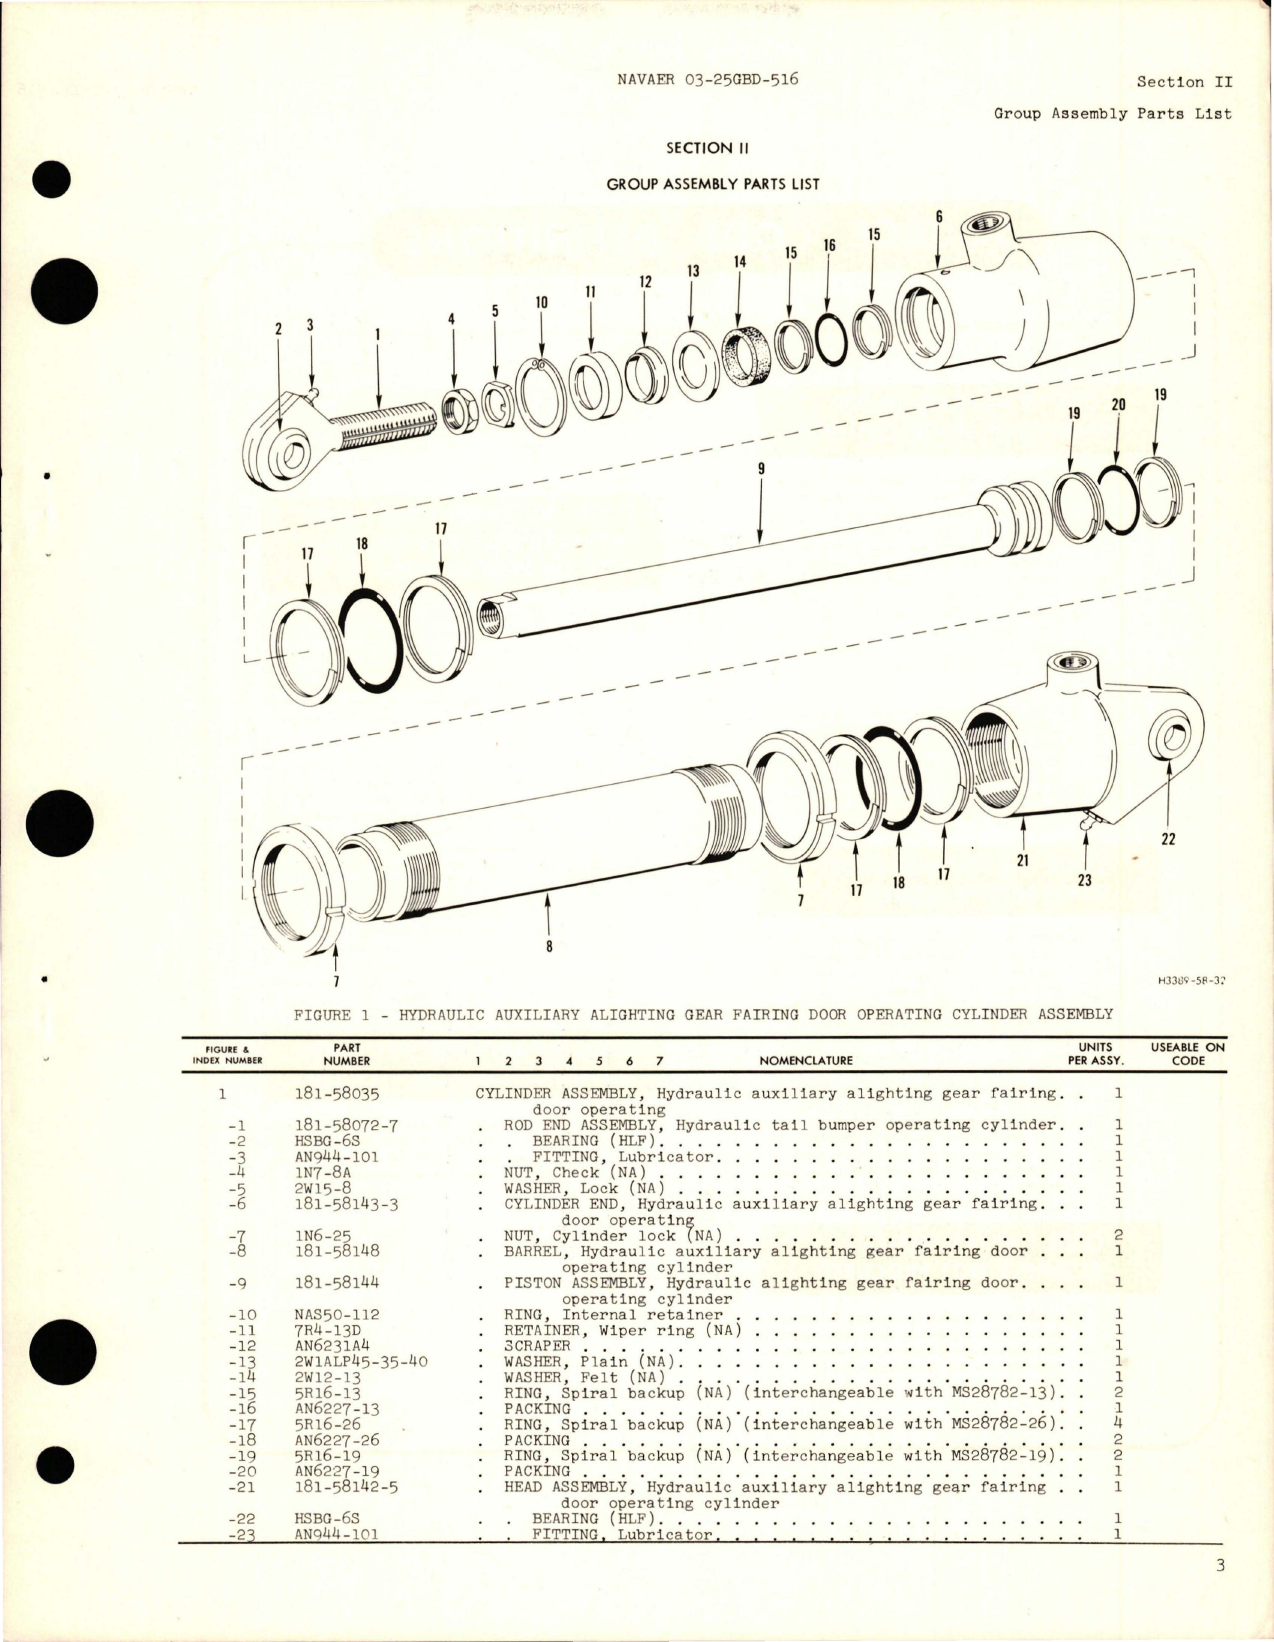 Sample page 5 from AirCorps Library document: Illustrated Parts Breakdown for Hydraulic Auxiliary Alighting Gear Fairing Door Operating Cylinder Assembly - Part 181-58035